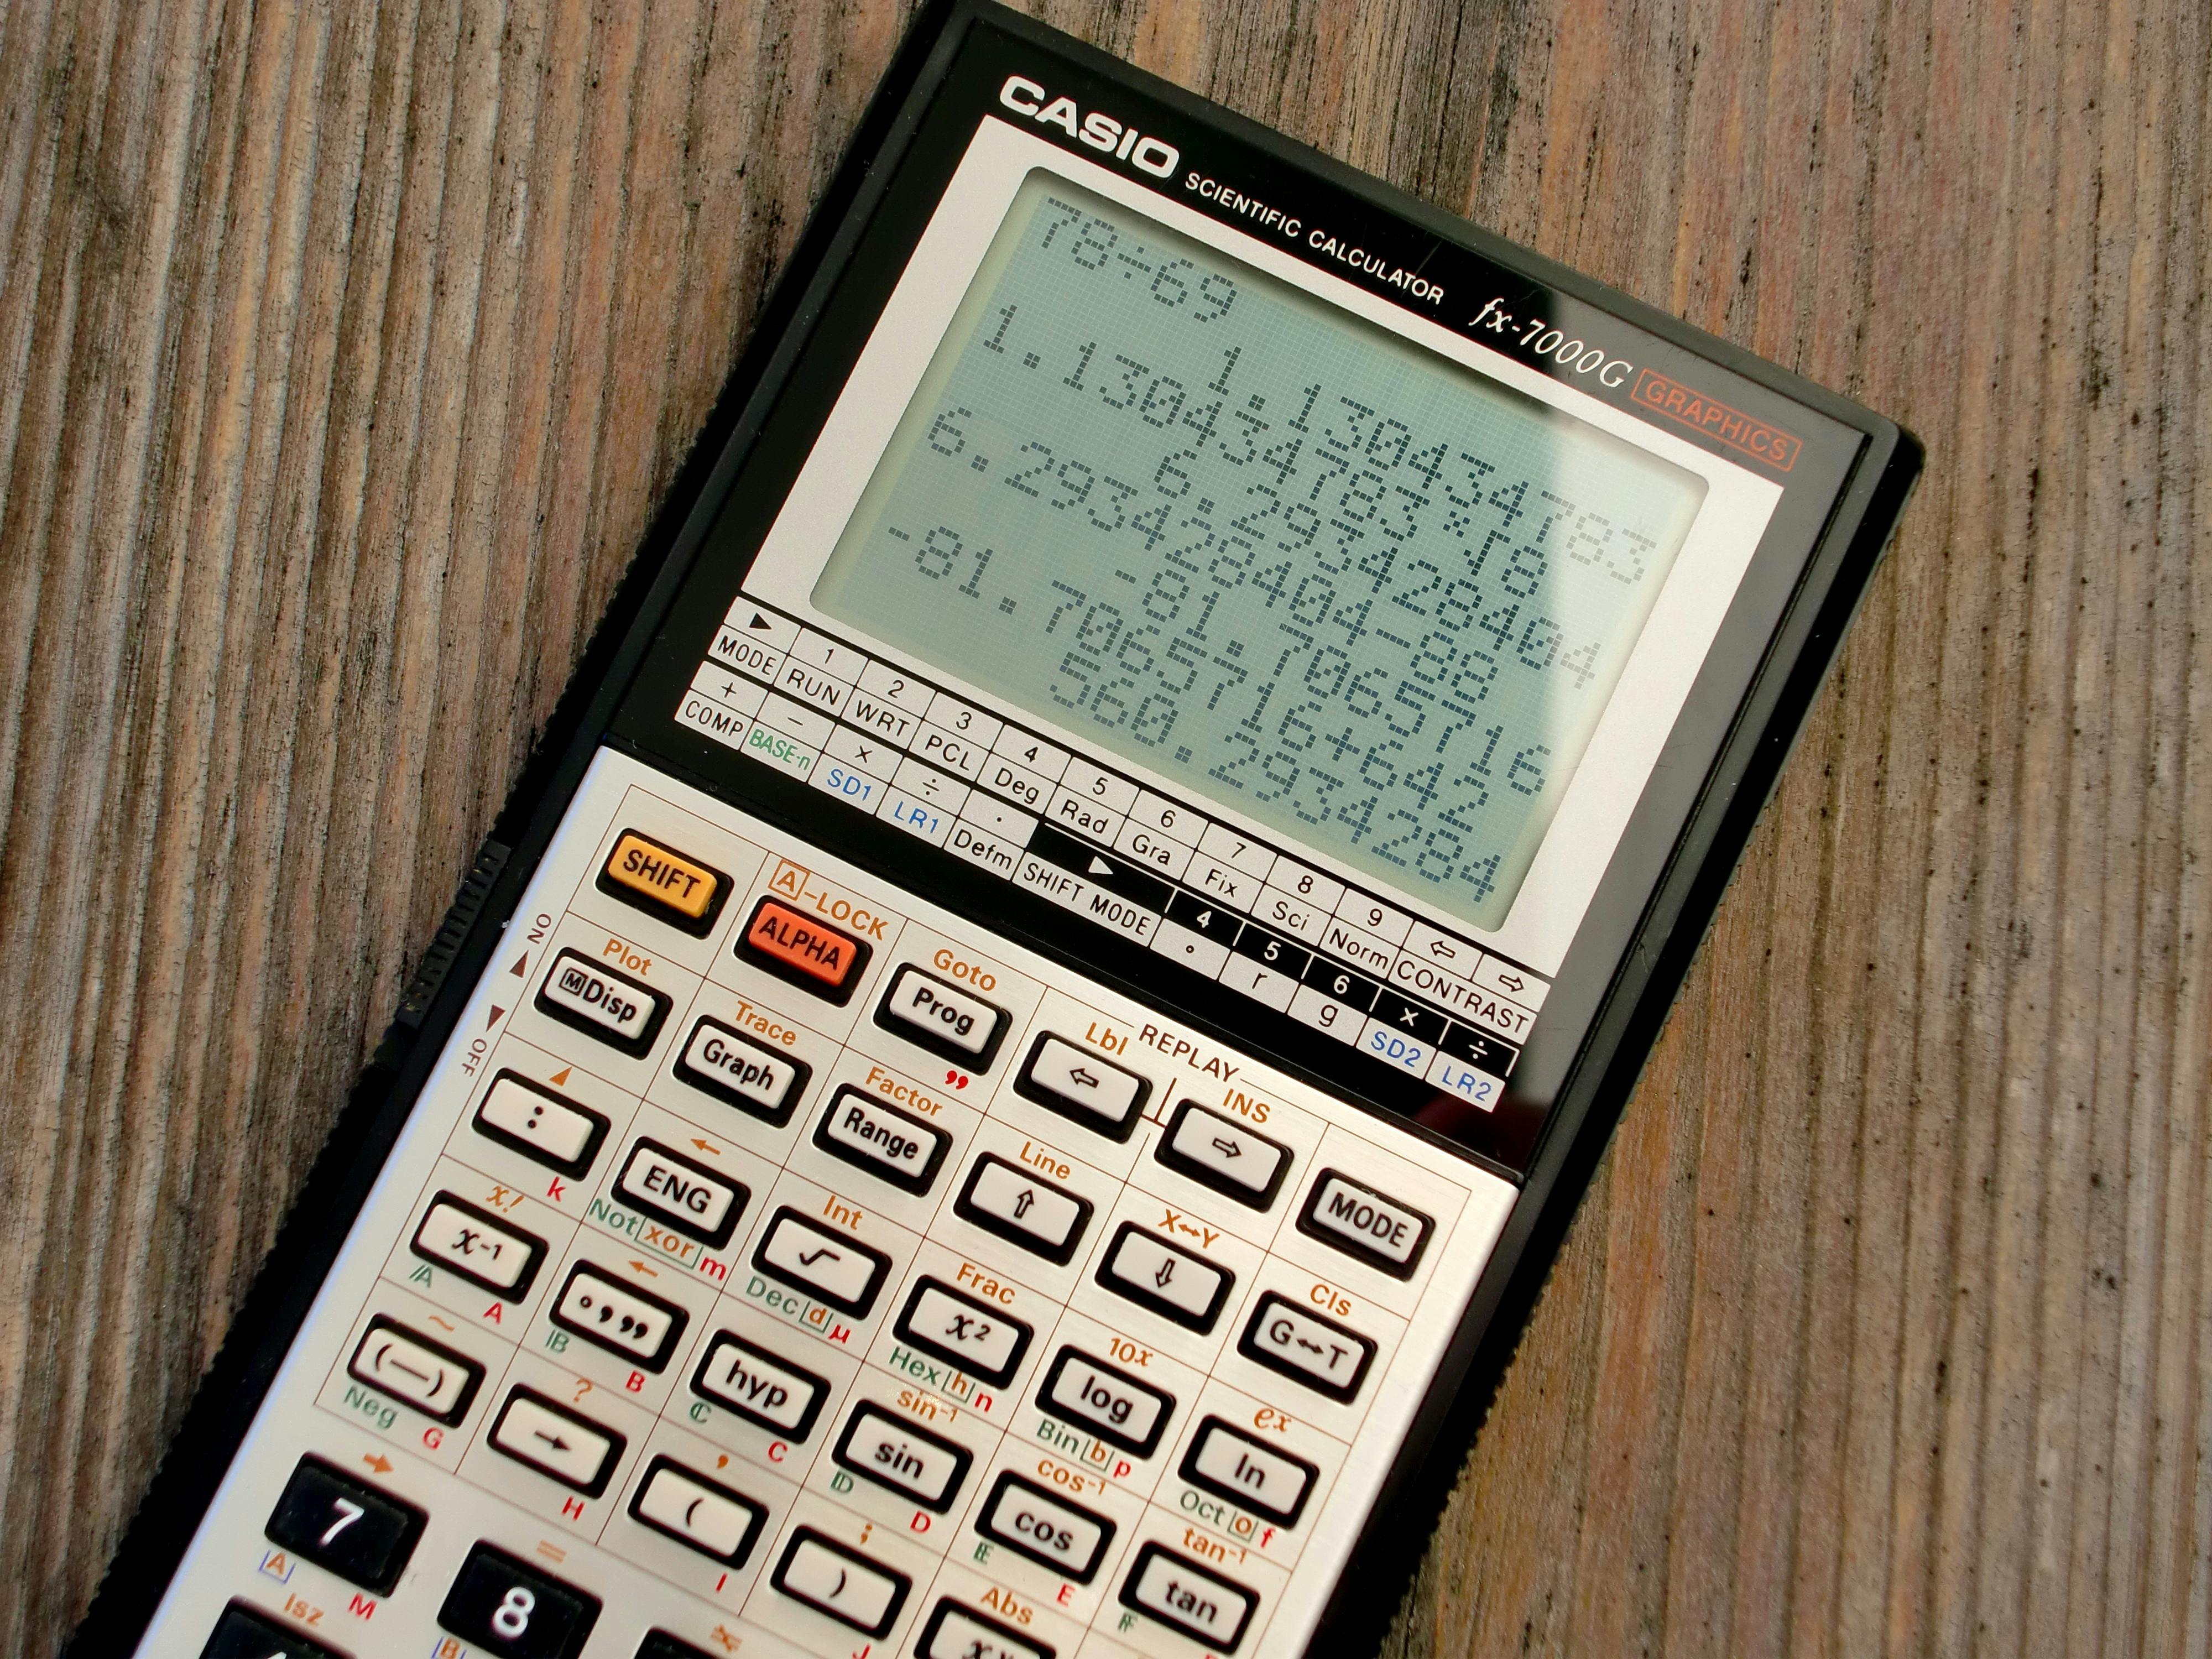 CASIO fx-7000G scientific calculator with graphics display, demonstrating complex mathematical computations, showcasing the efficiency of using Python numeric types for mathematical projects.